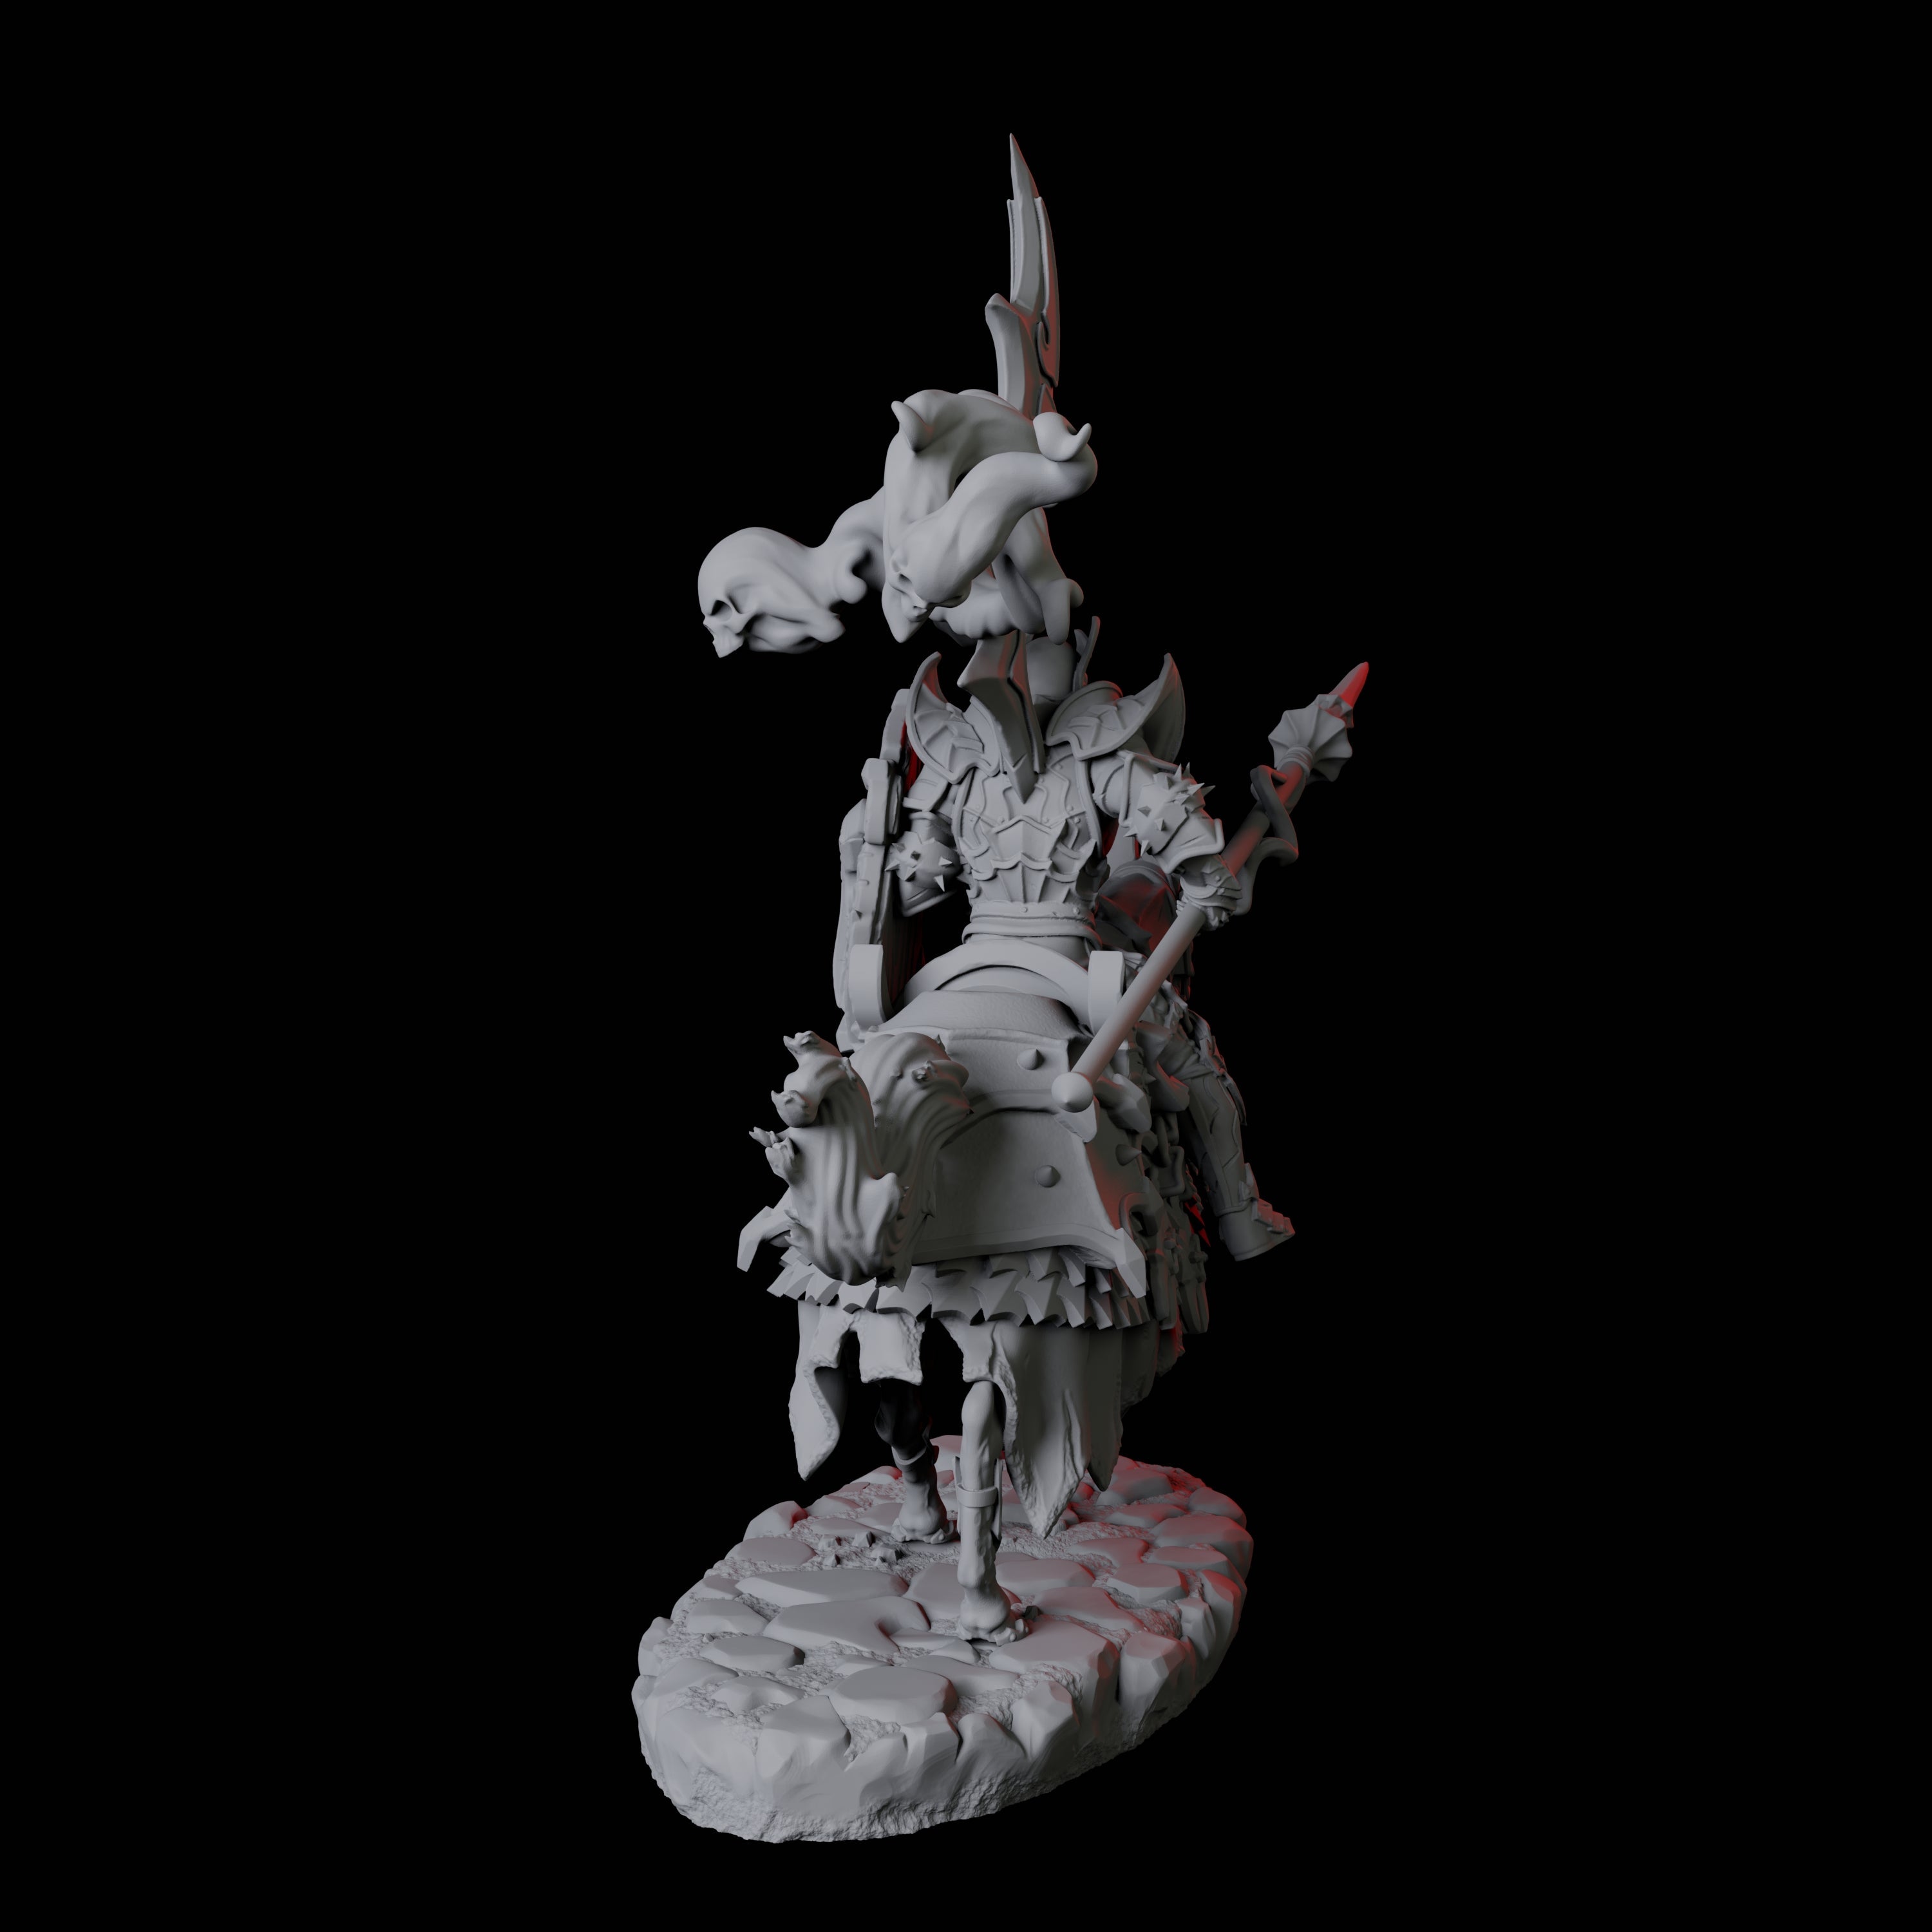 Stalking Mounted Revenant A Miniature for Dungeons and Dragons, Pathfinder or other TTRPGs